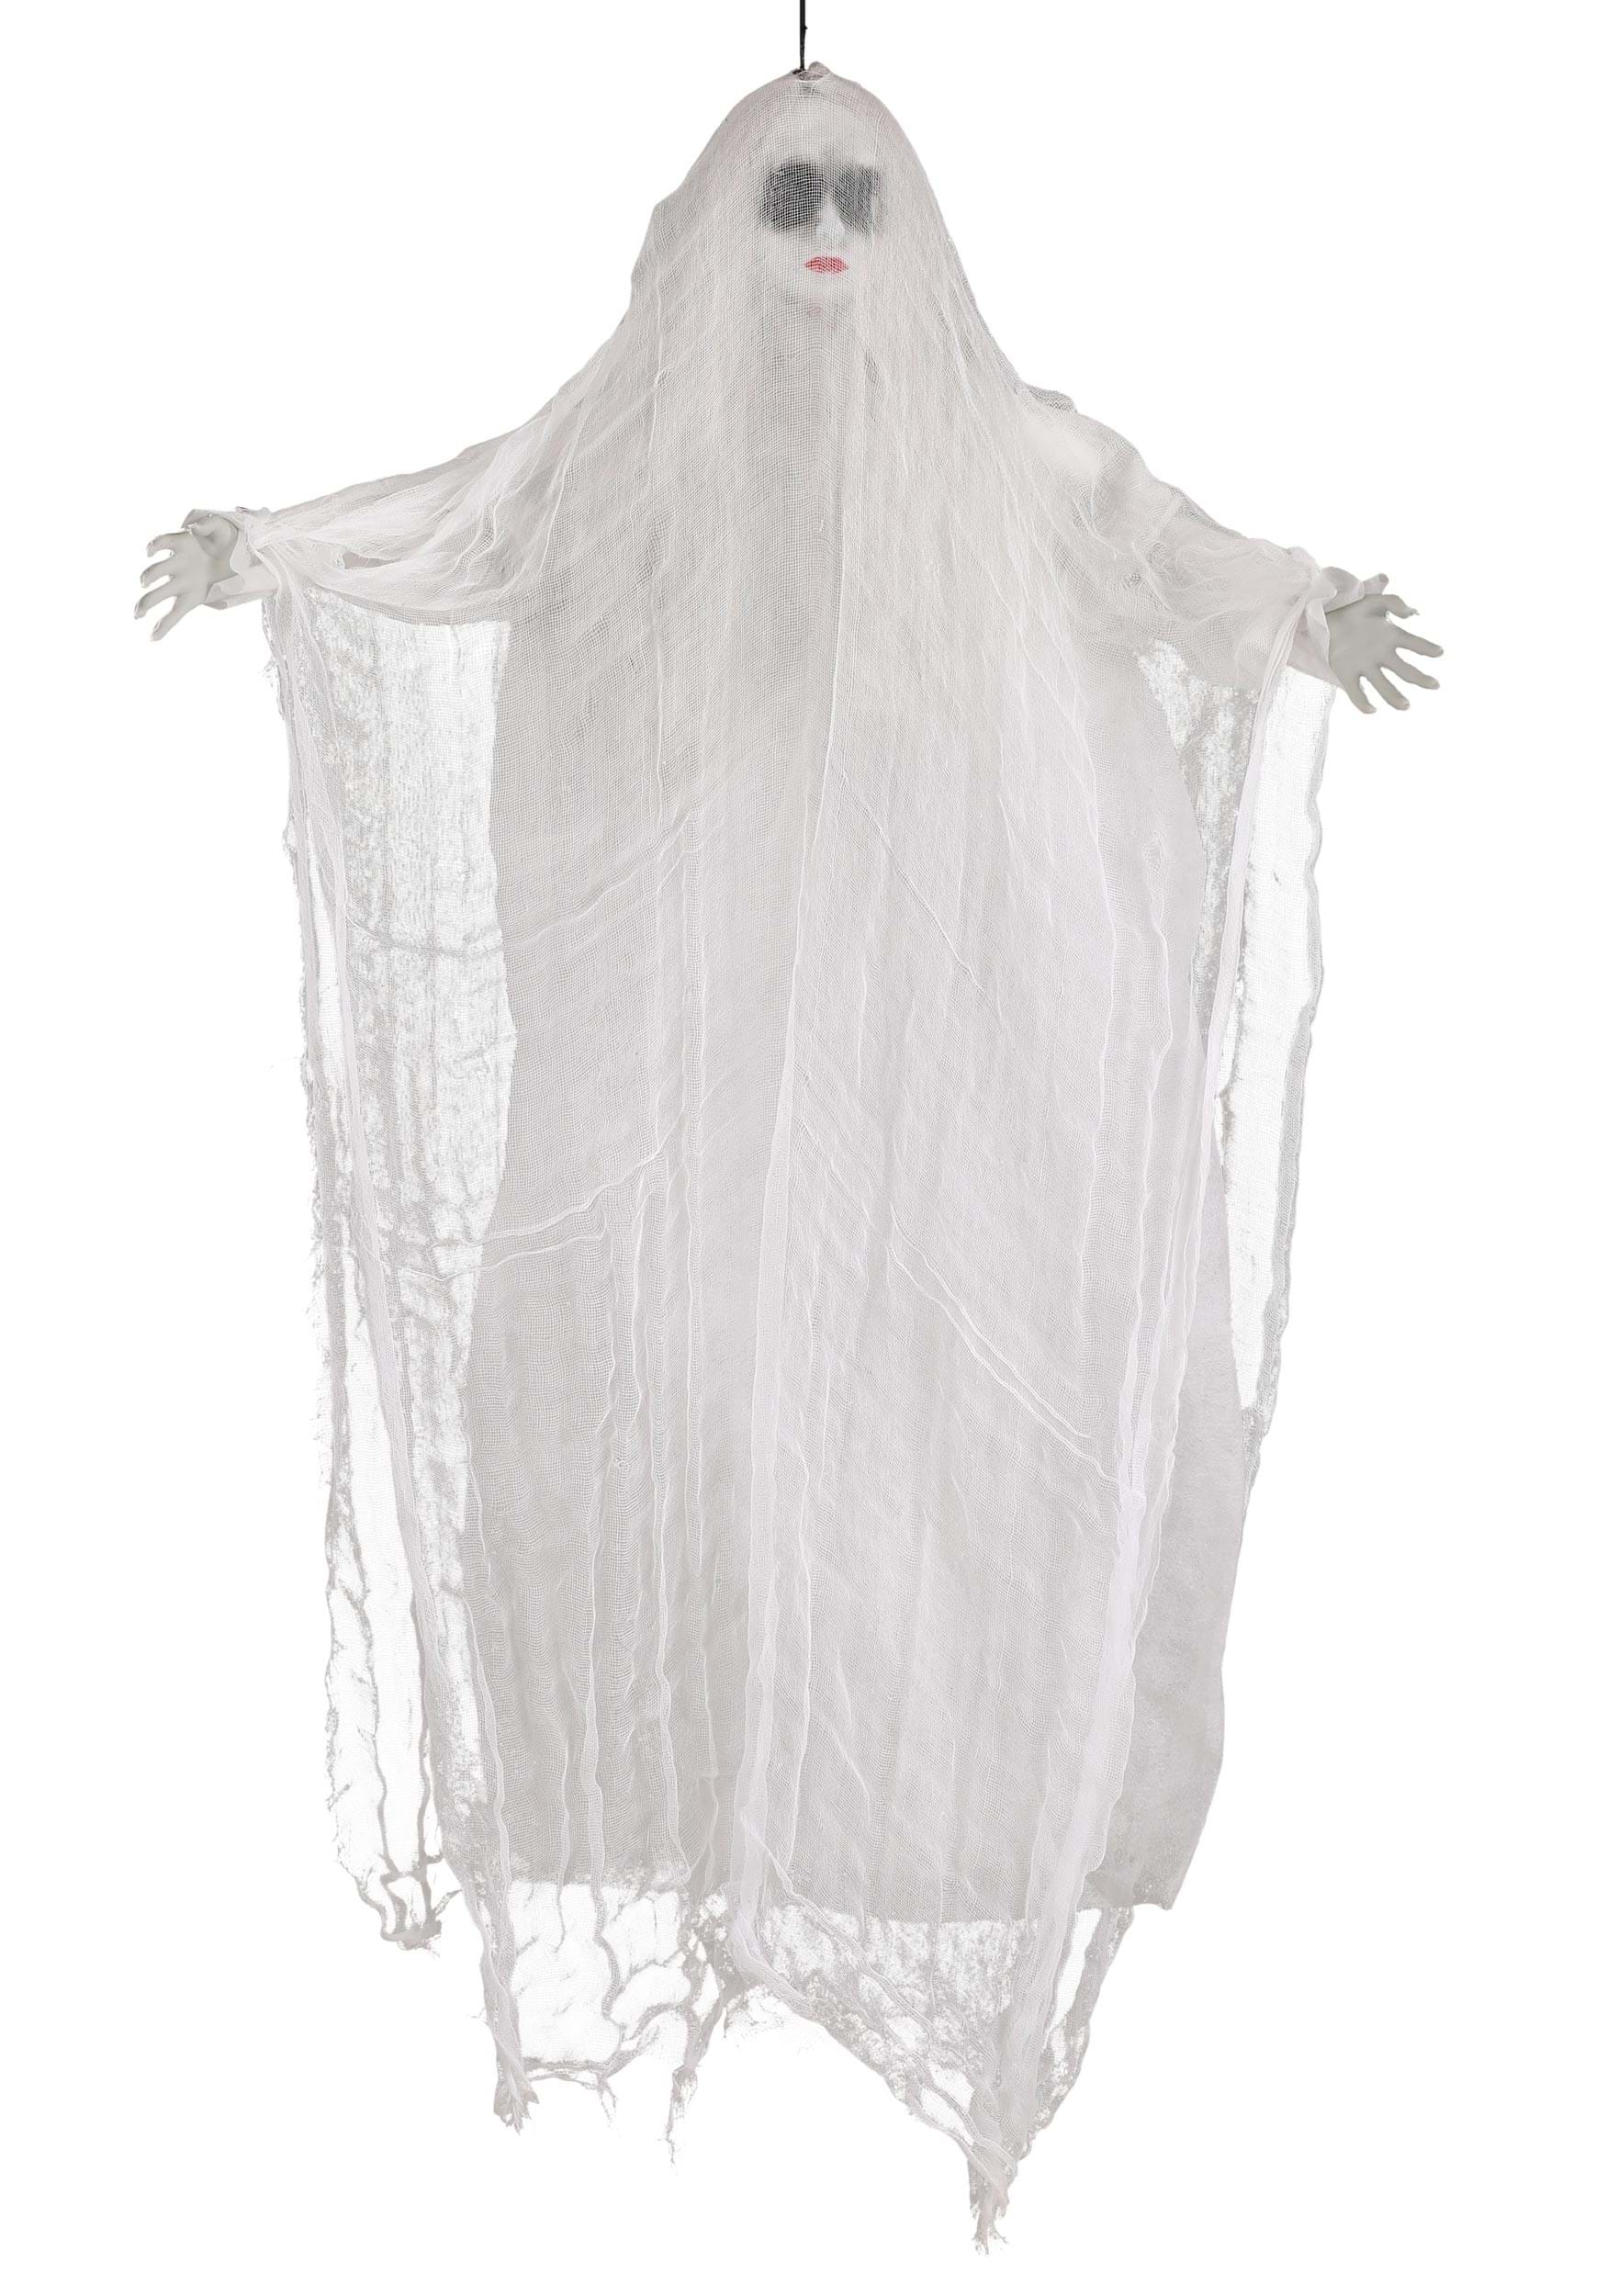 3' Hanging Female Ghost Prop , Hanging Decorations